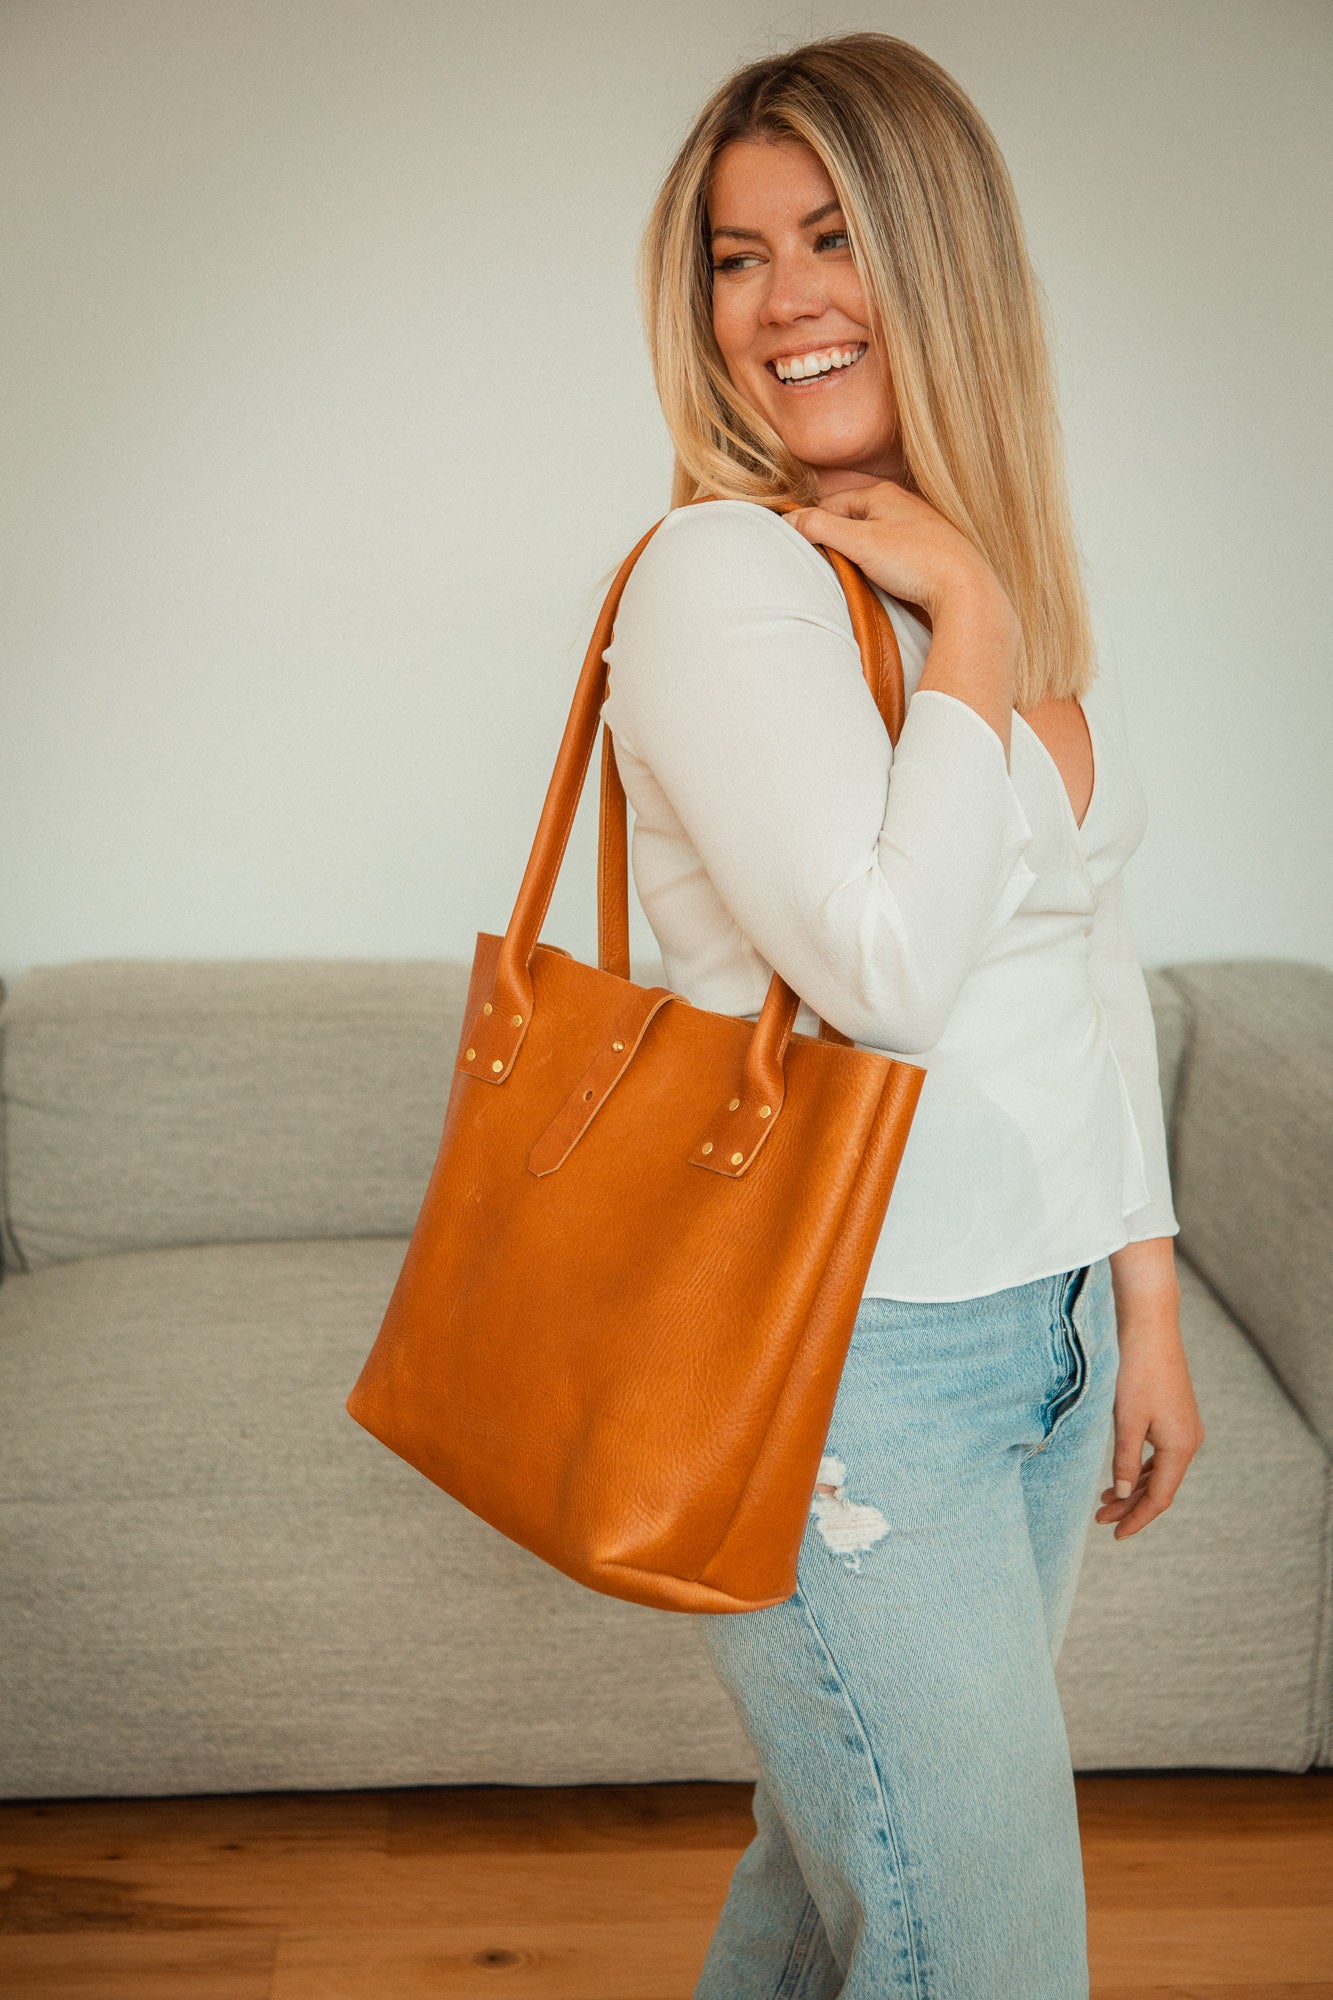 Leather Refined Tote in Brown Leather Bag - handcrafted by Market Canvas Leather in Tofino, BC, Canada